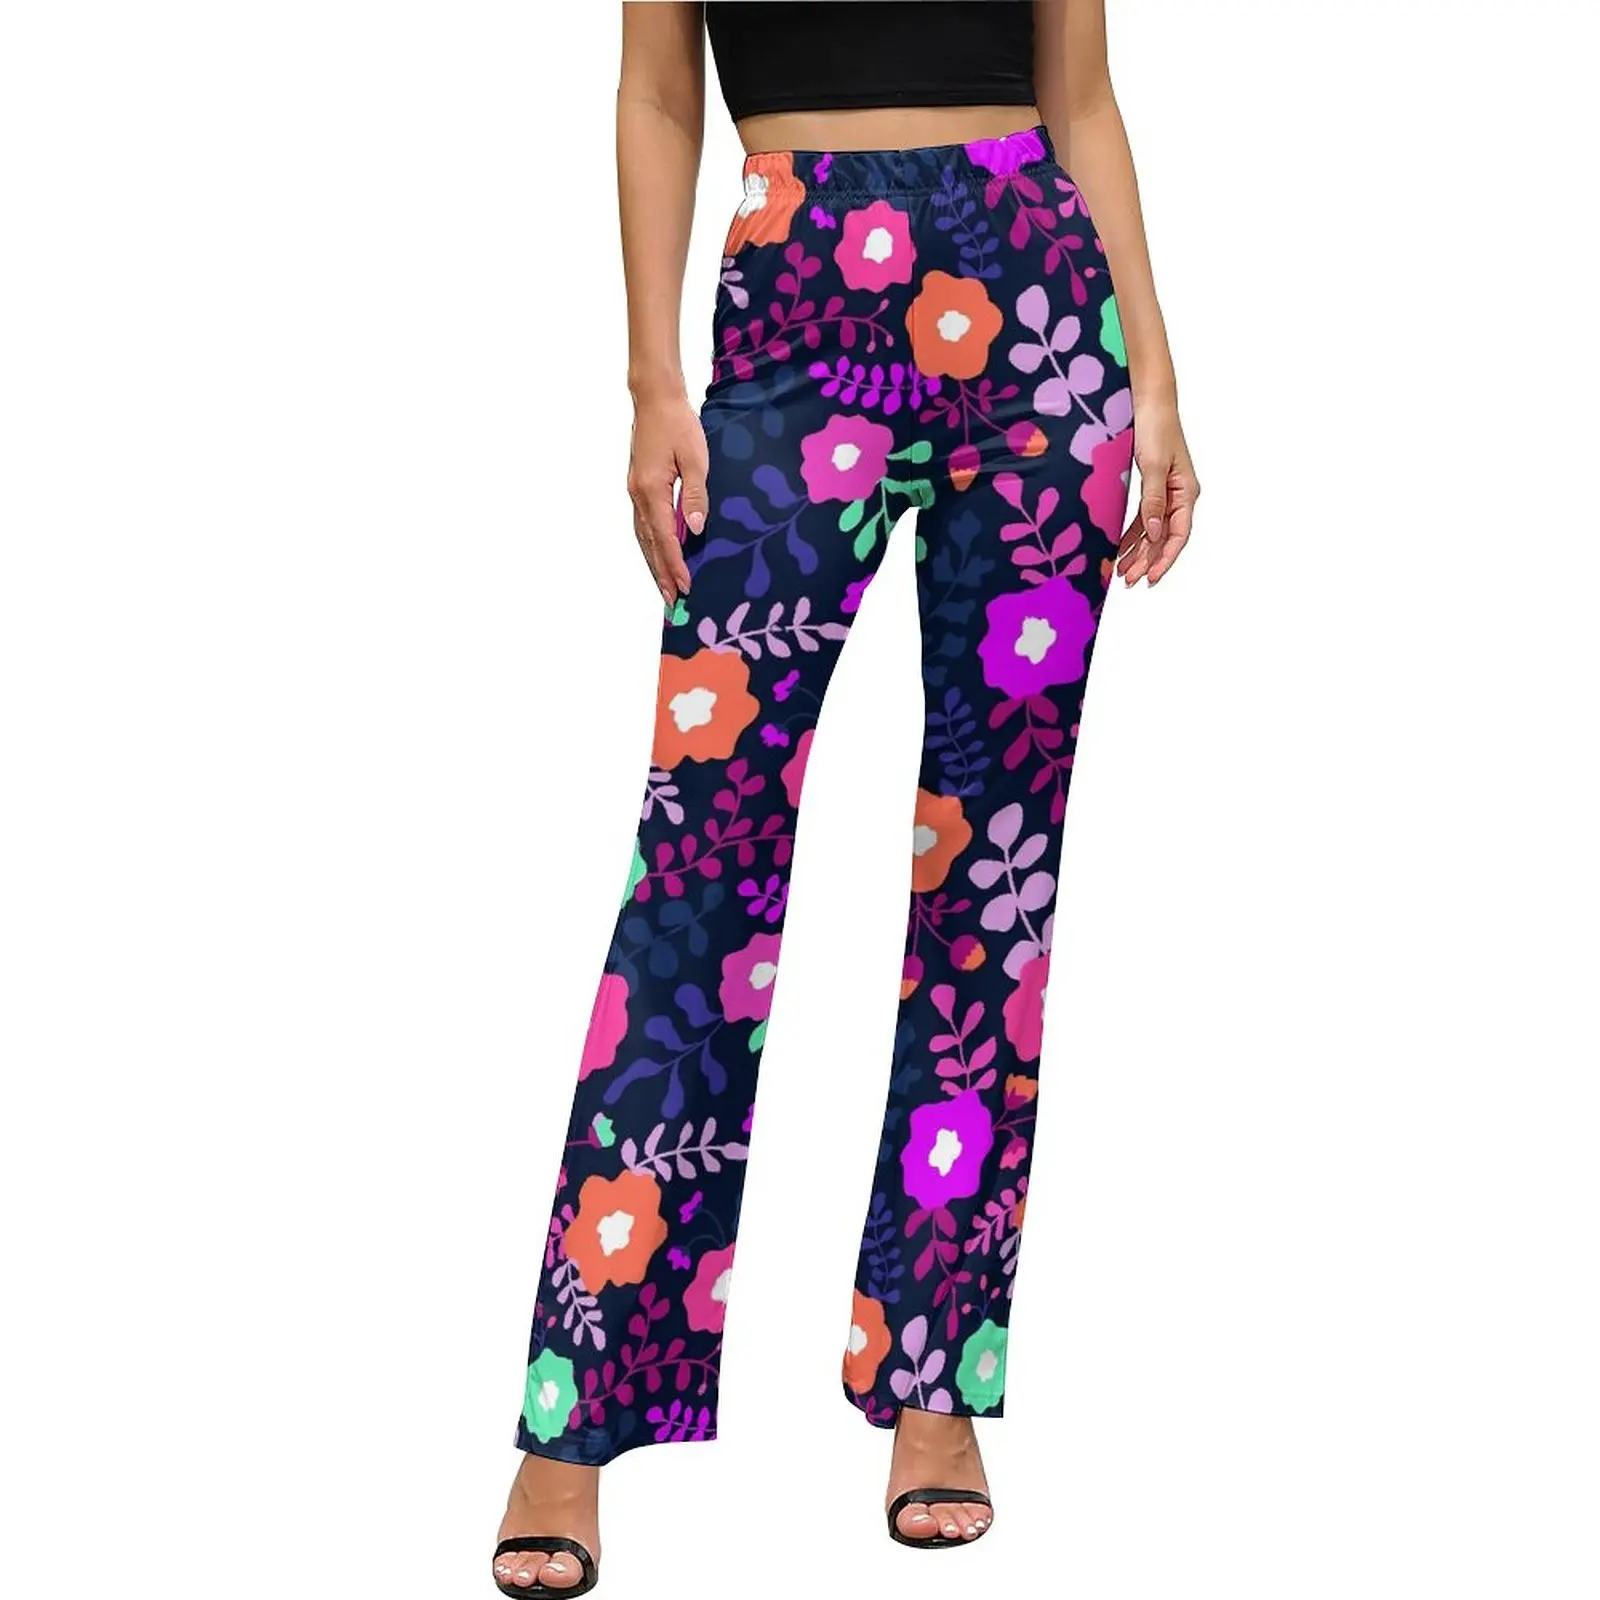 

Purple Ditsy Floral Pants High Waist Flowers Print Korean Fashion Flared Pants Daily Kawaii Graphic Oversize Trousers